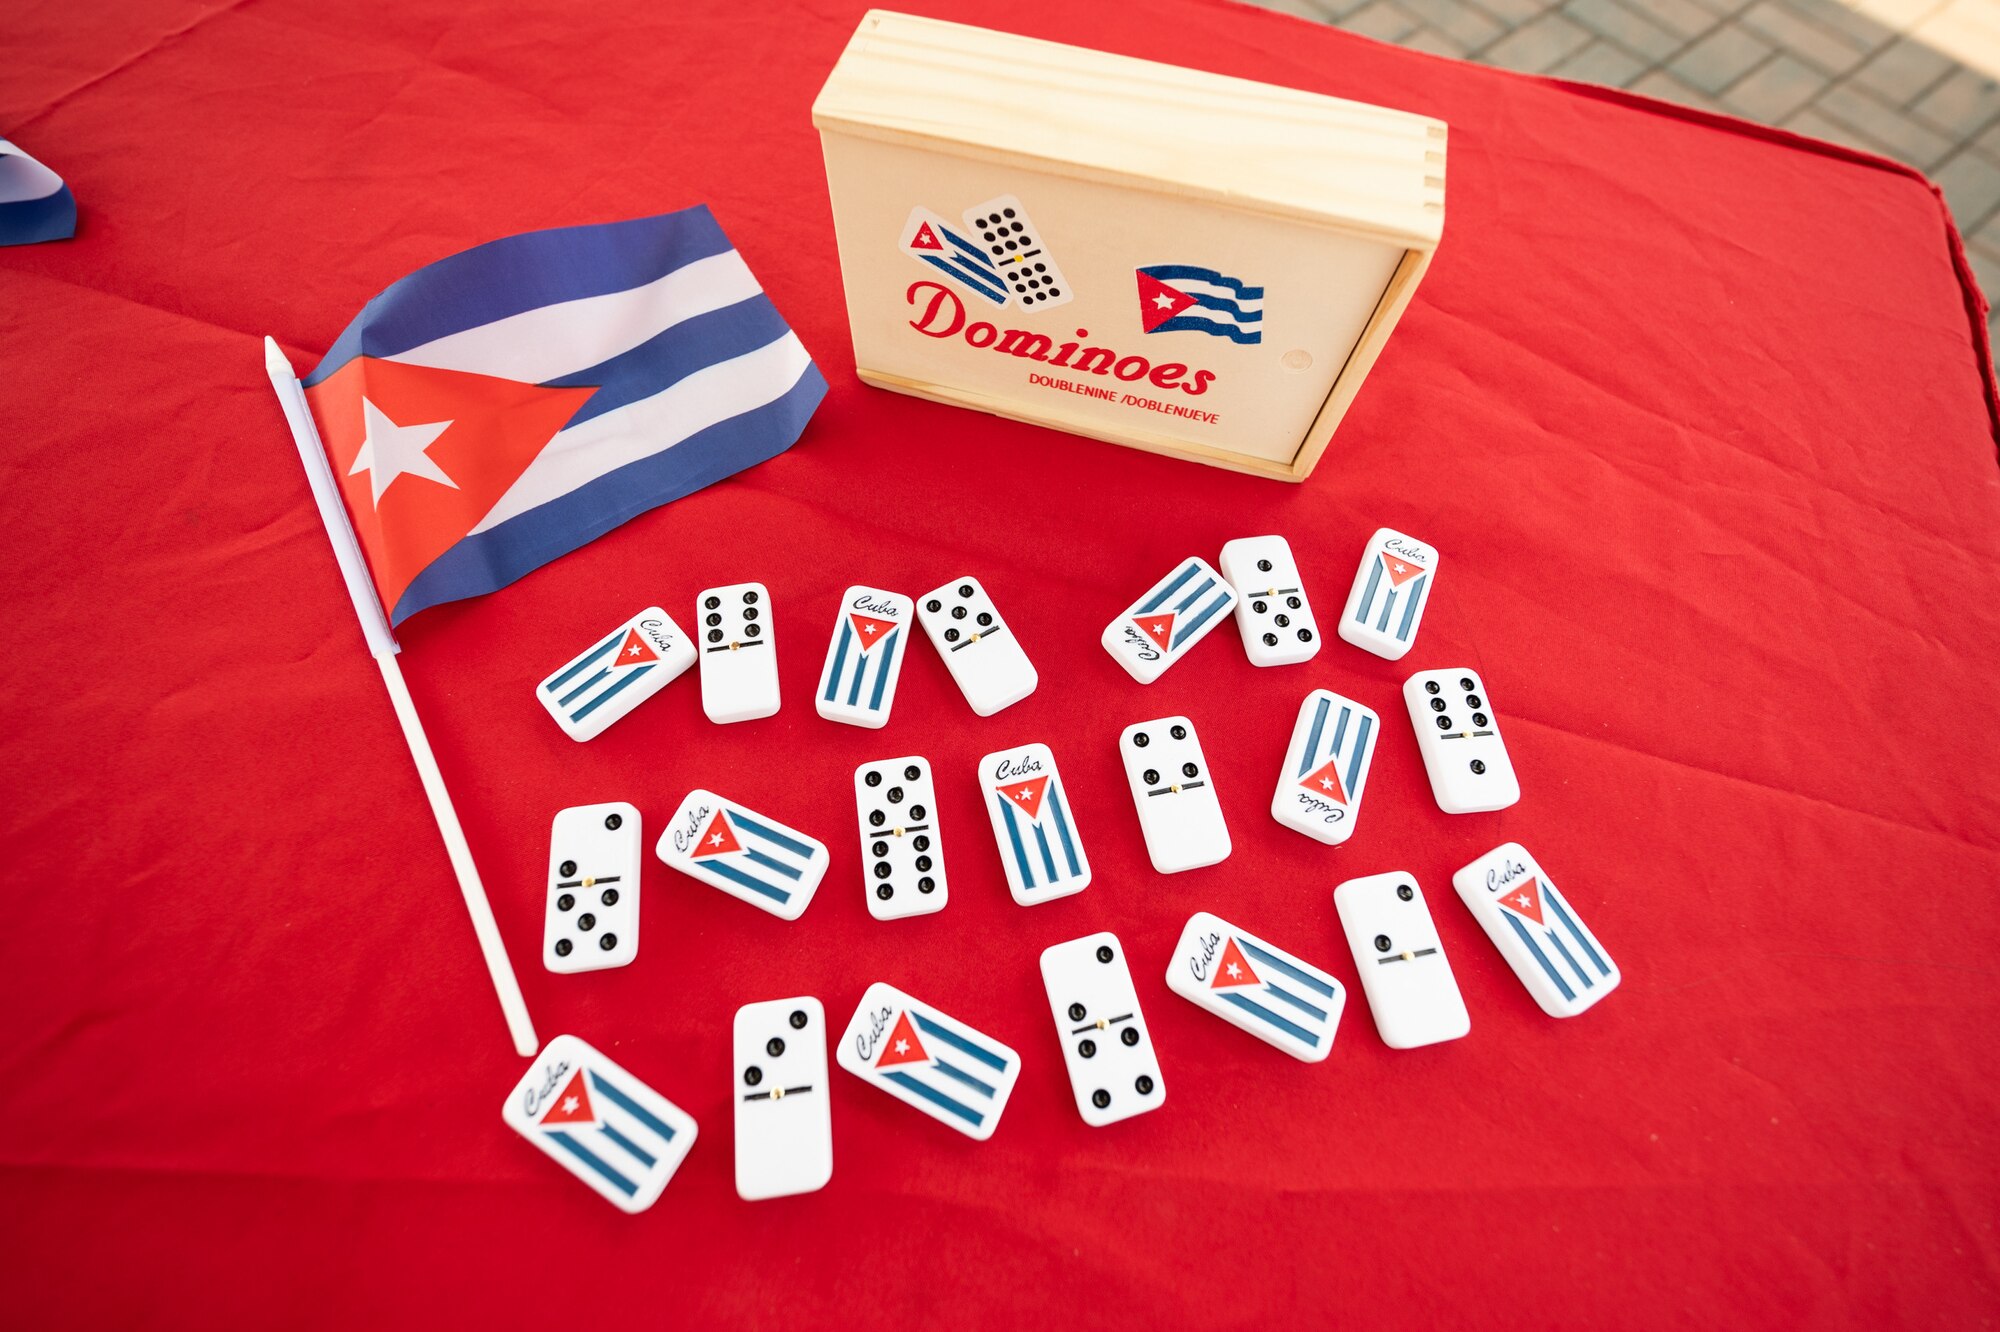 A dominoes set with the Cuban flag is displayed at the Hispanic Heritage Month Block Party on Dover Air Force Base, Delaware, Sept. 15, 2021. Dominoes is a popular game throughout many Latin American countries. National Hispanic Heritage Month is observed from Sept.r 15 to Oct. 15 in recognition and celebration of Latin American history and culture. (U.S. Air Force photo by Mauricio Campino)